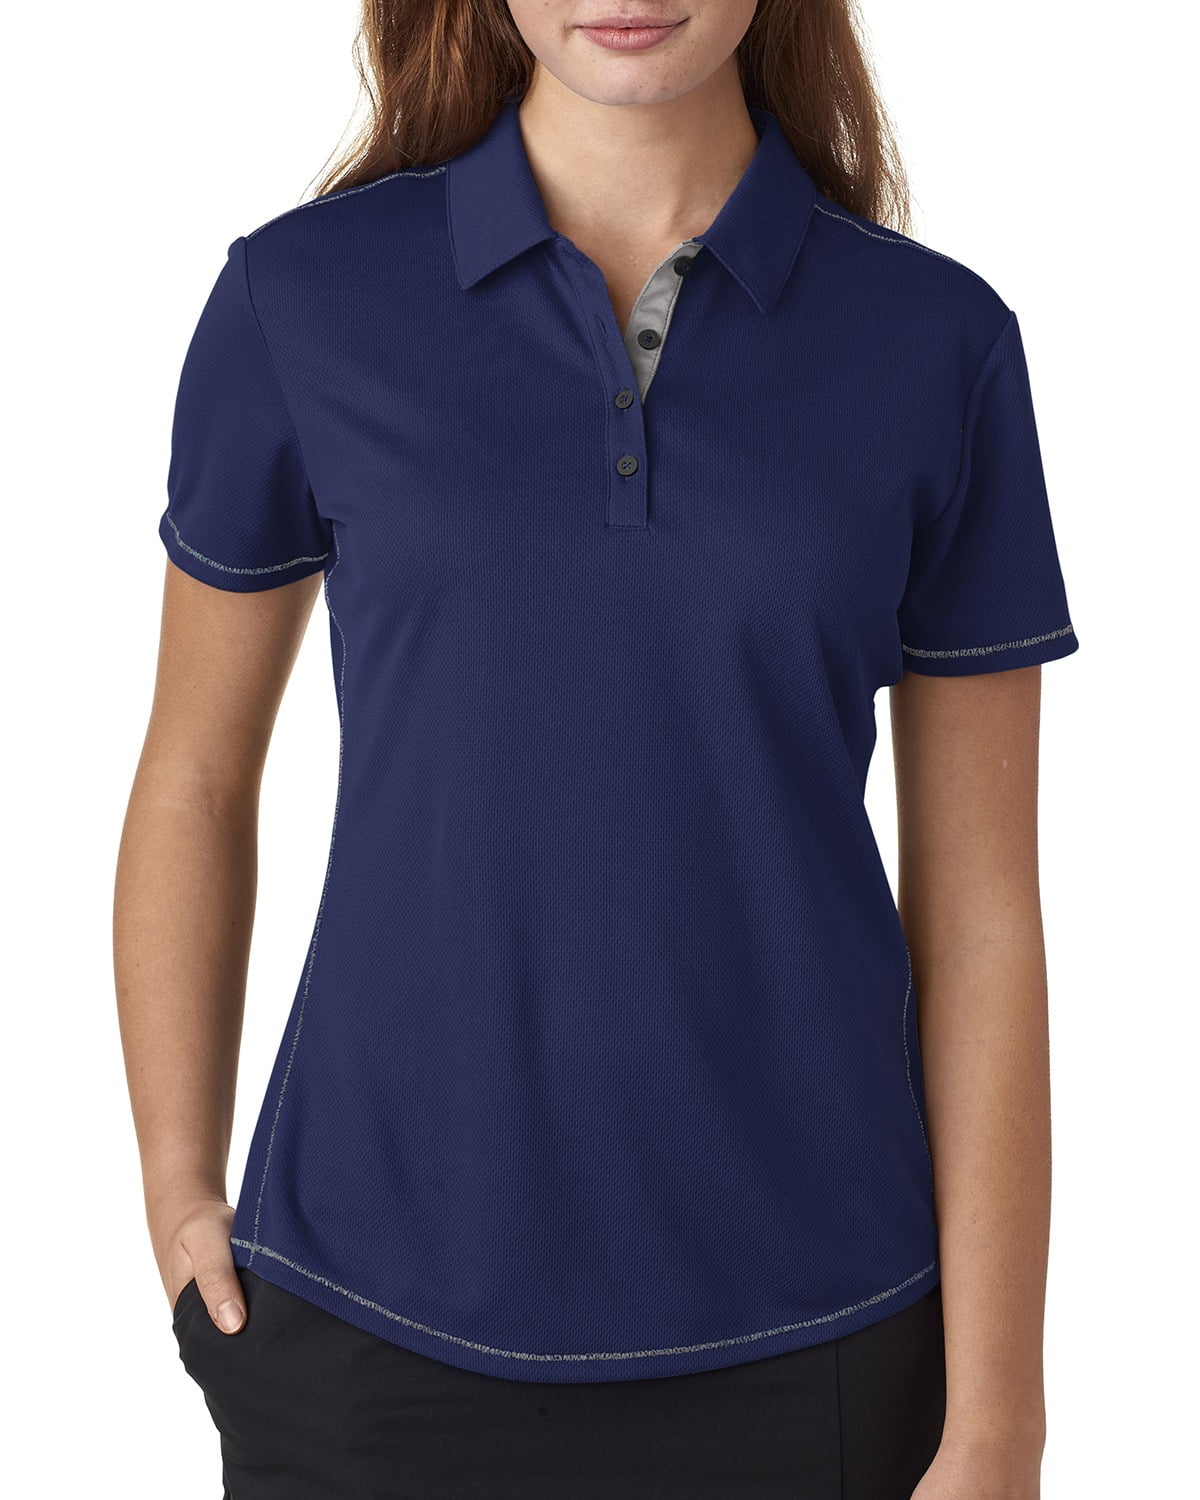 Adidas A222 Ladies climacool Mesh Color Hit Polo Shirt - Mid